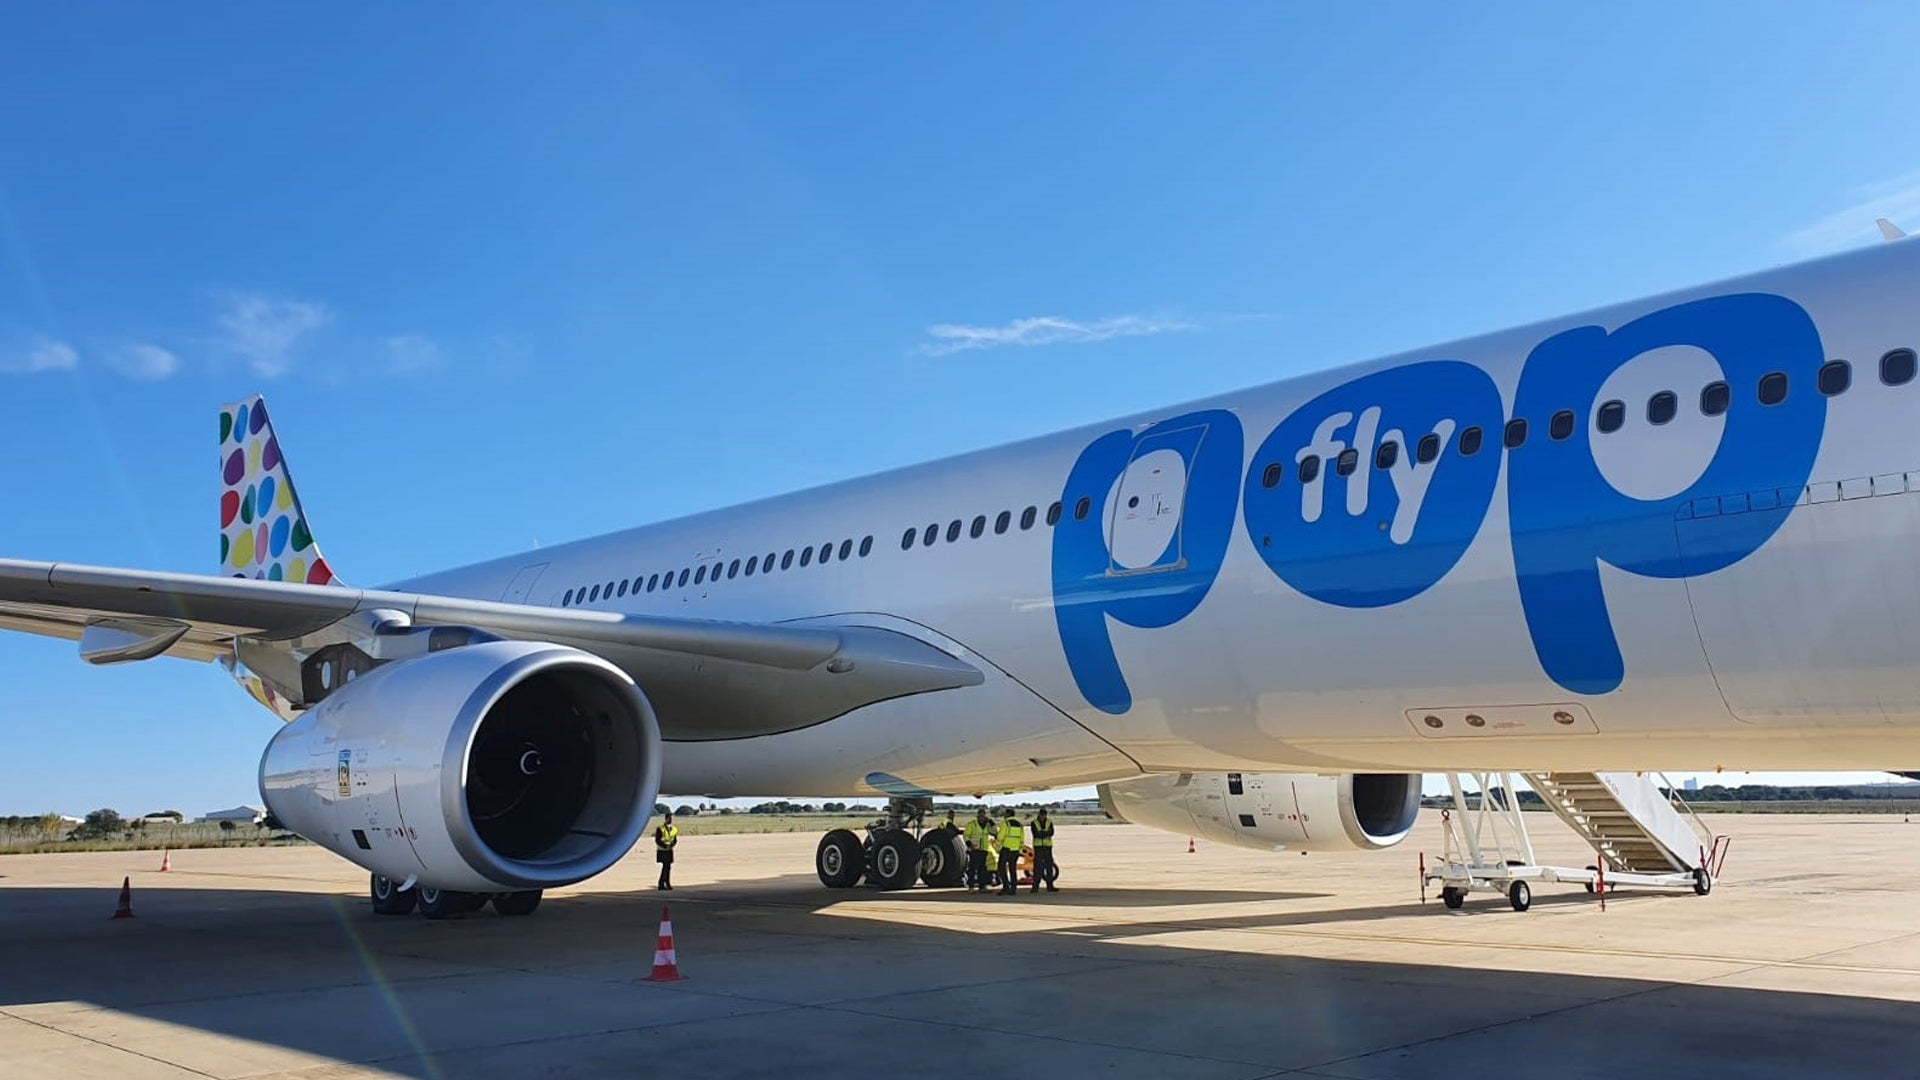 Blocked From Flying Passengers, Budget Startup Flypop Turns to Cargo